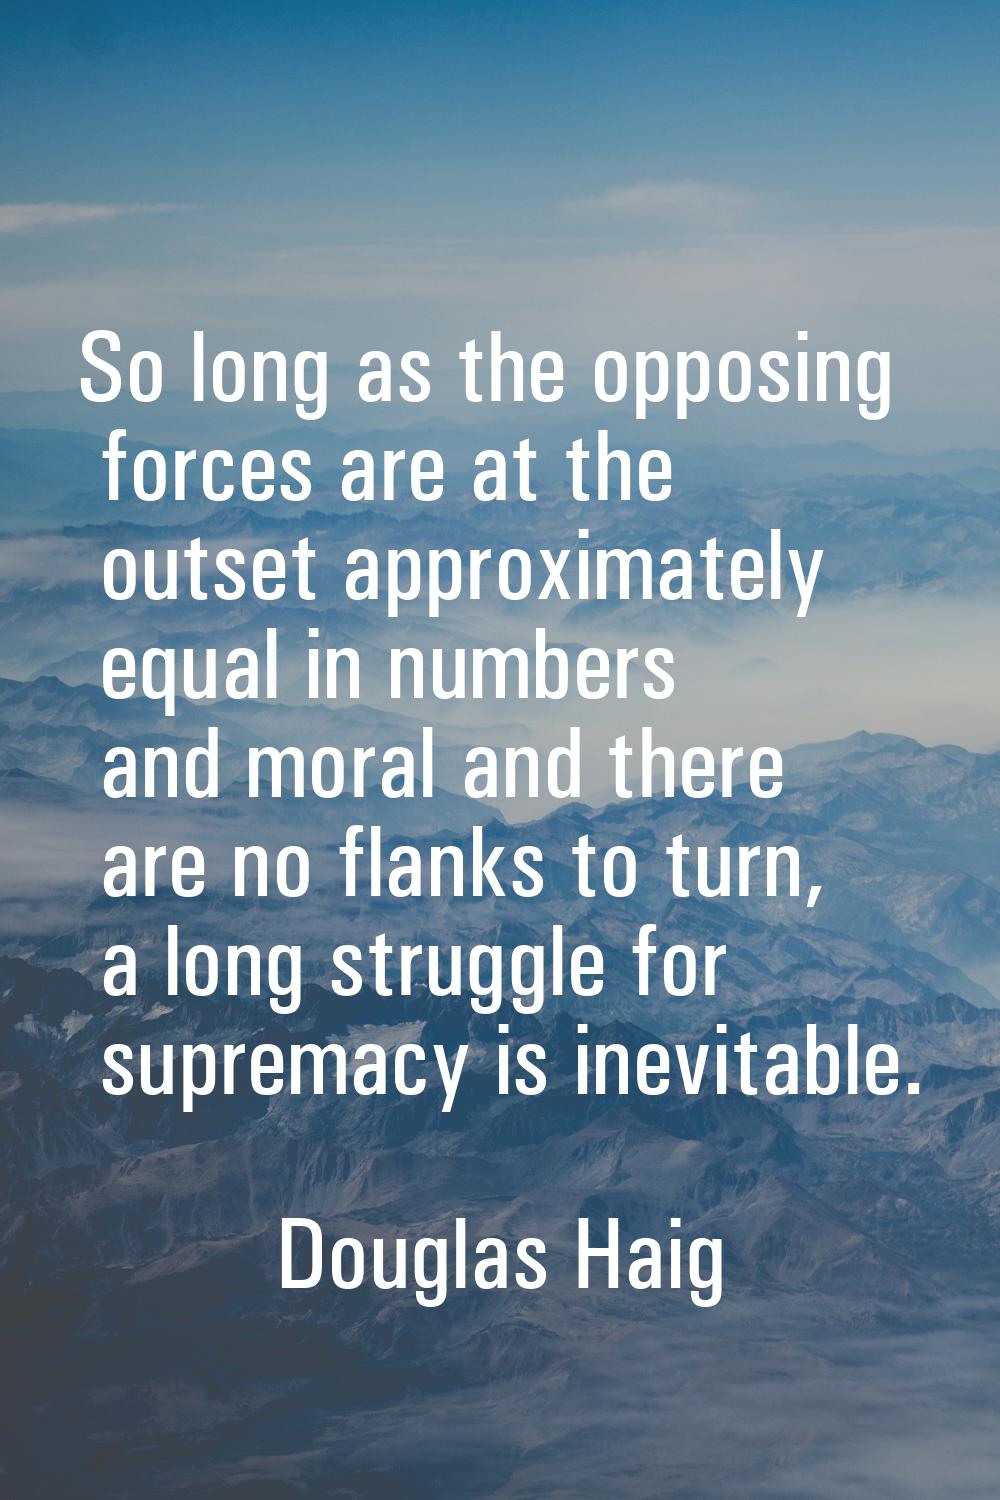 So long as the opposing forces are at the outset approximately equal in numbers and moral and there